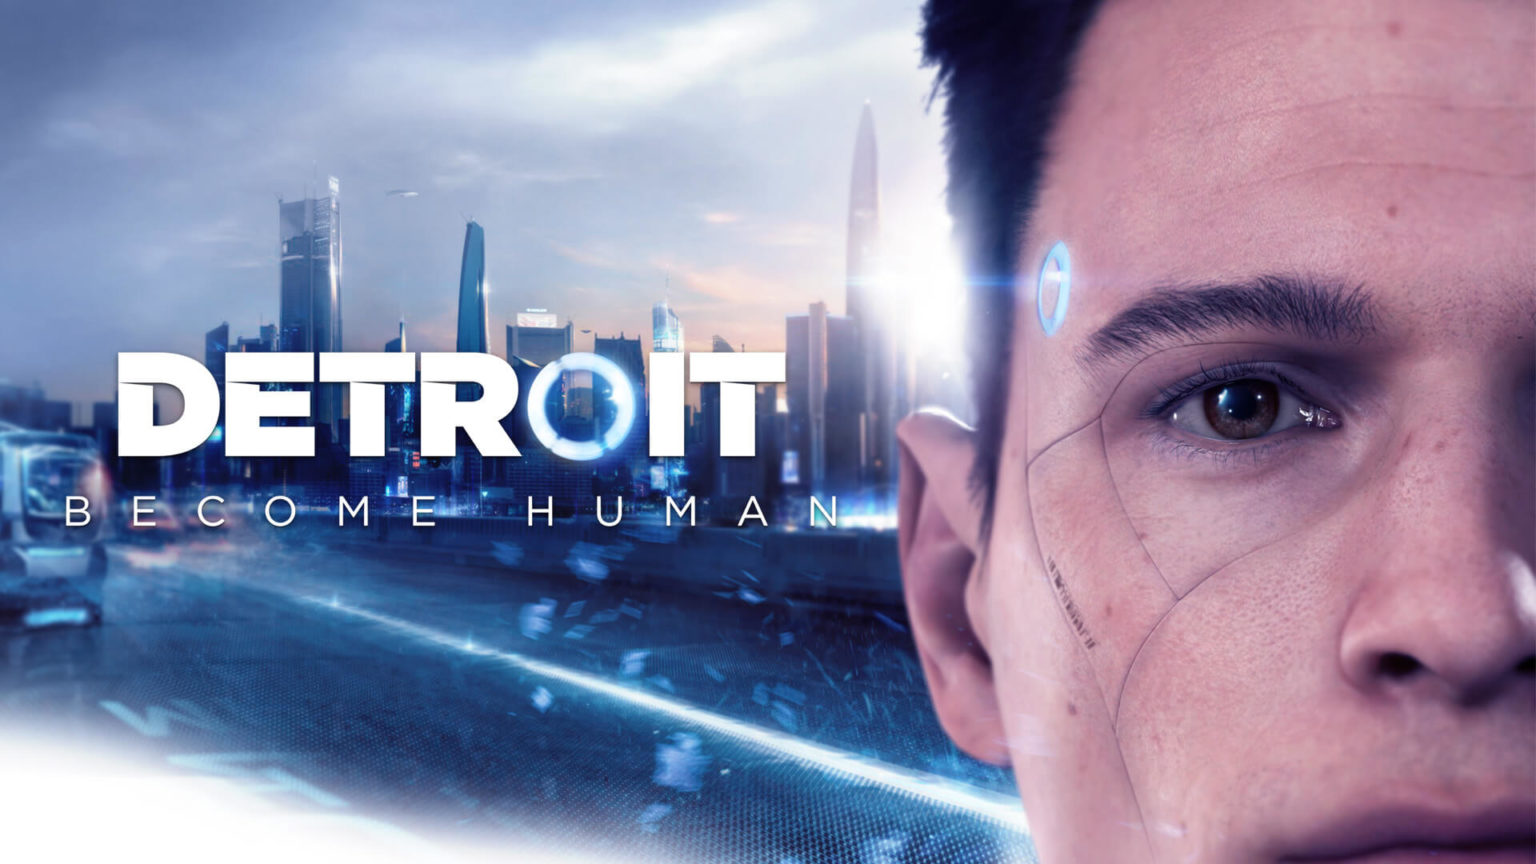 Detroit: Become Human iOS/APK Version Full Game Free Download